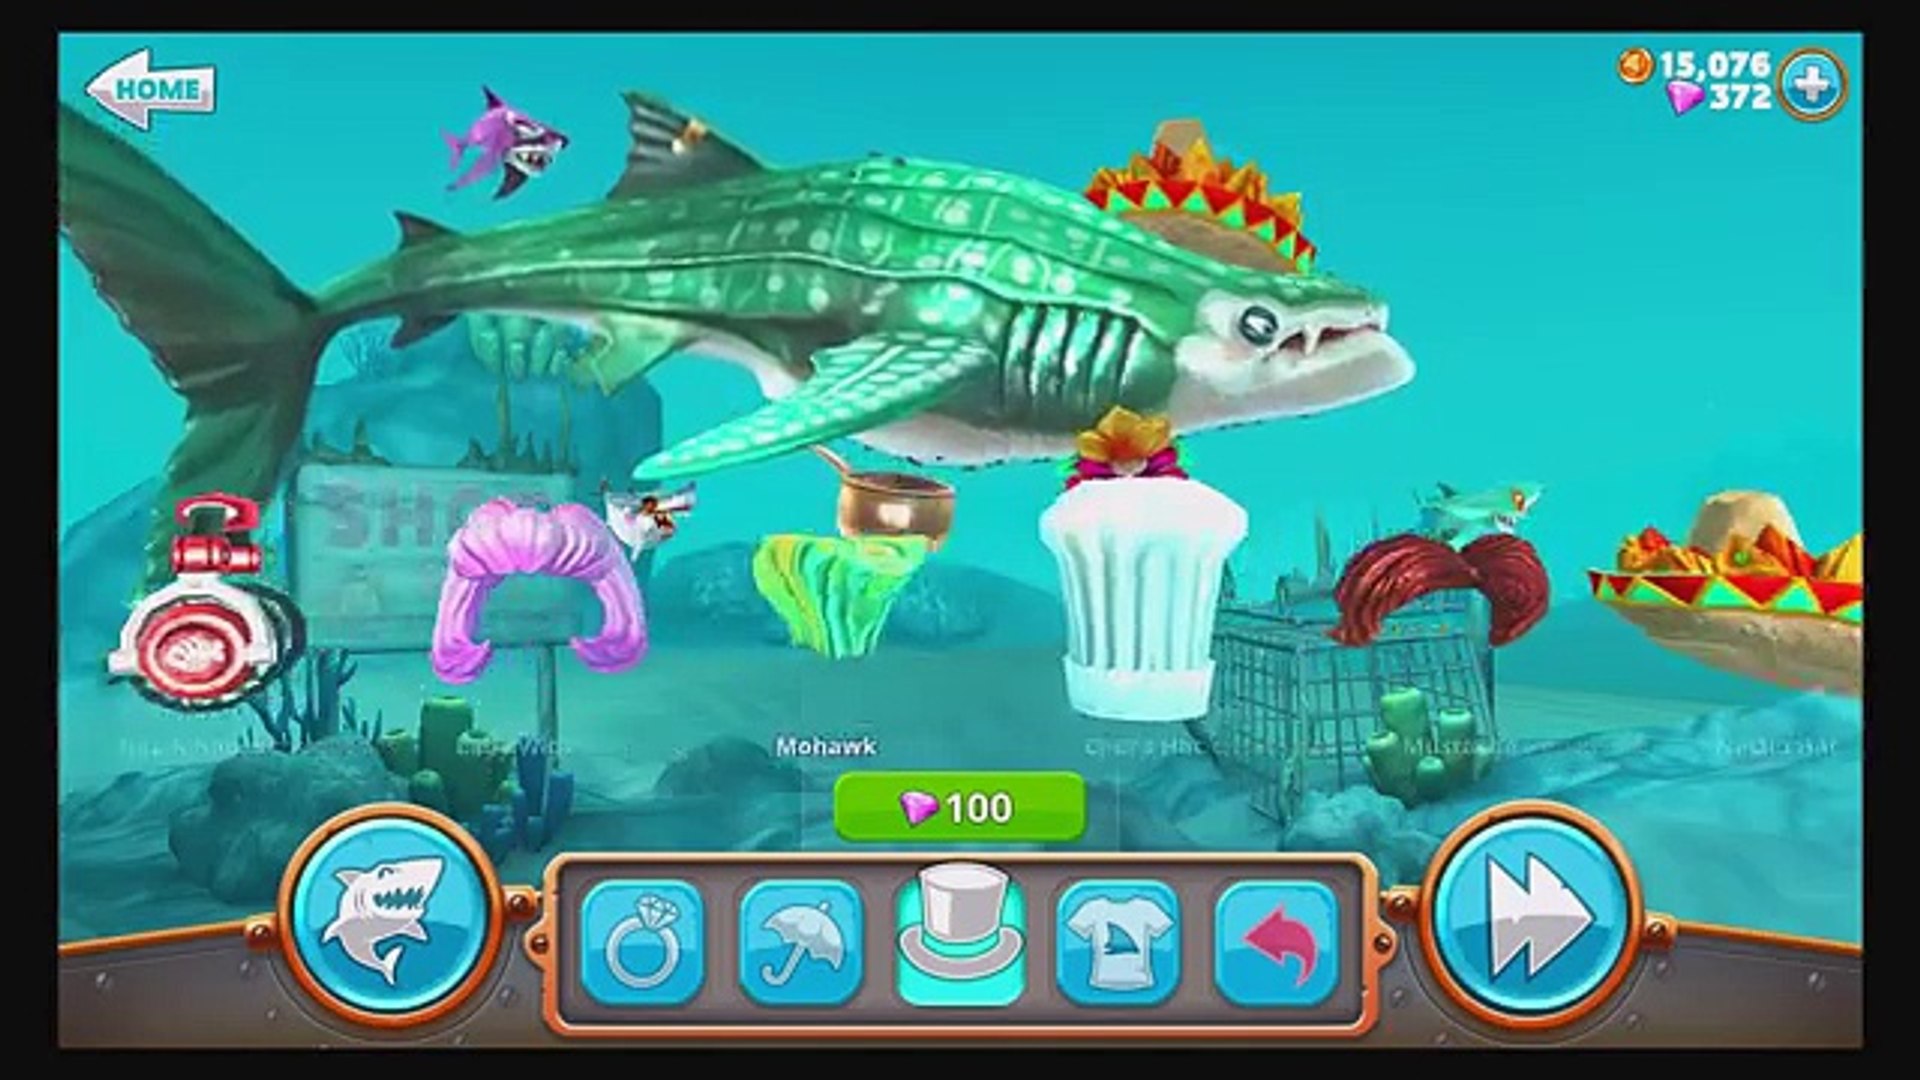 All Pets Gameplay Hungry Shark World Dave Felix Cecil Kraken Anna Trevor Will P Dailymotion Video